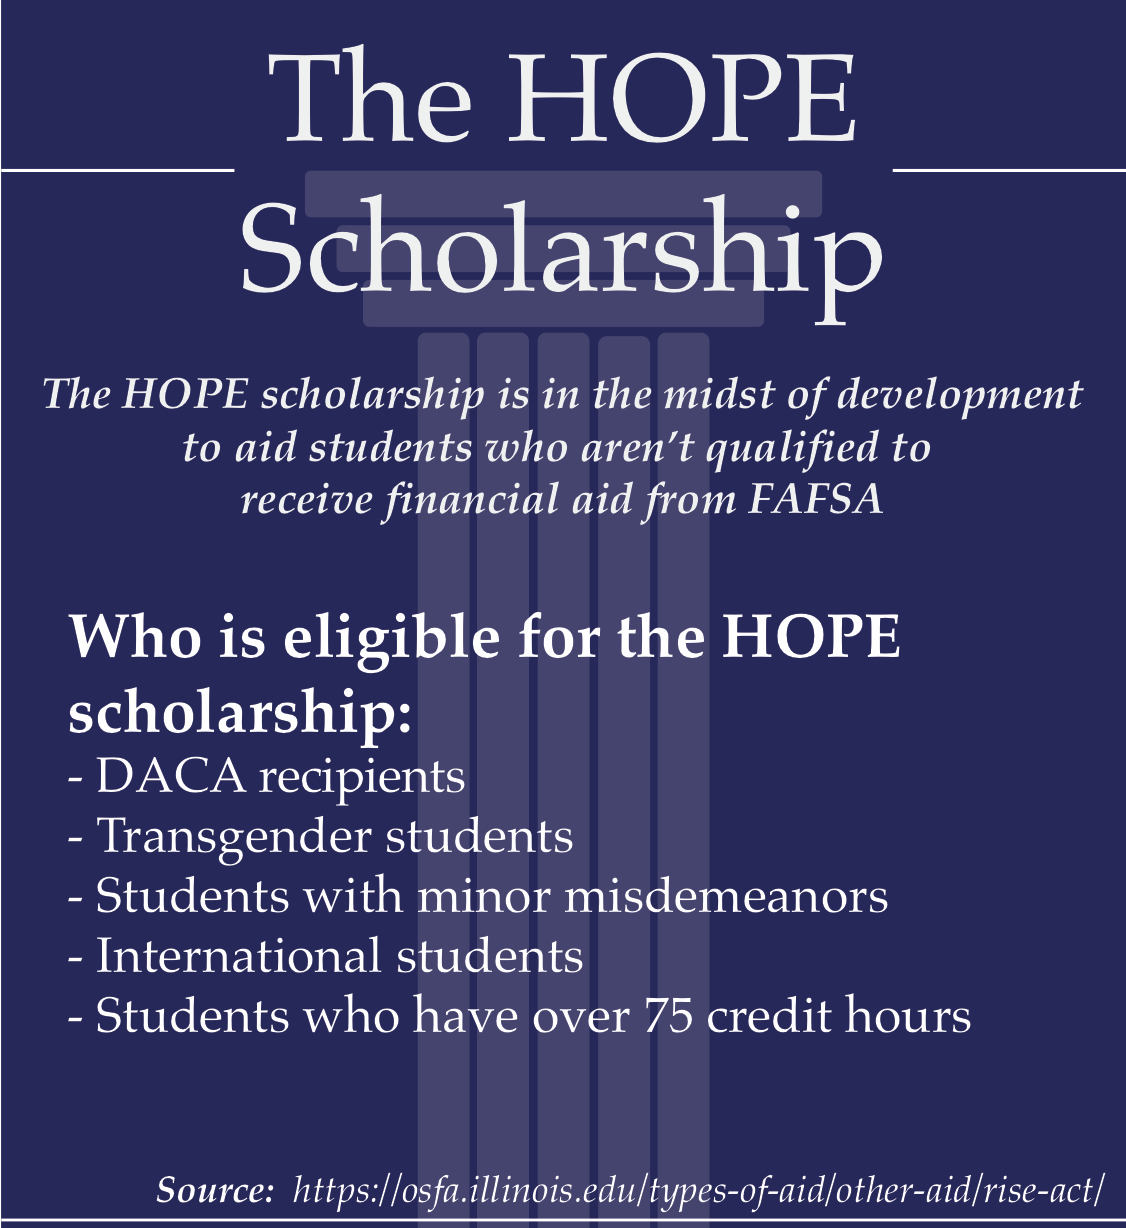 HOPE scholarship gives hope to those ineligible for government